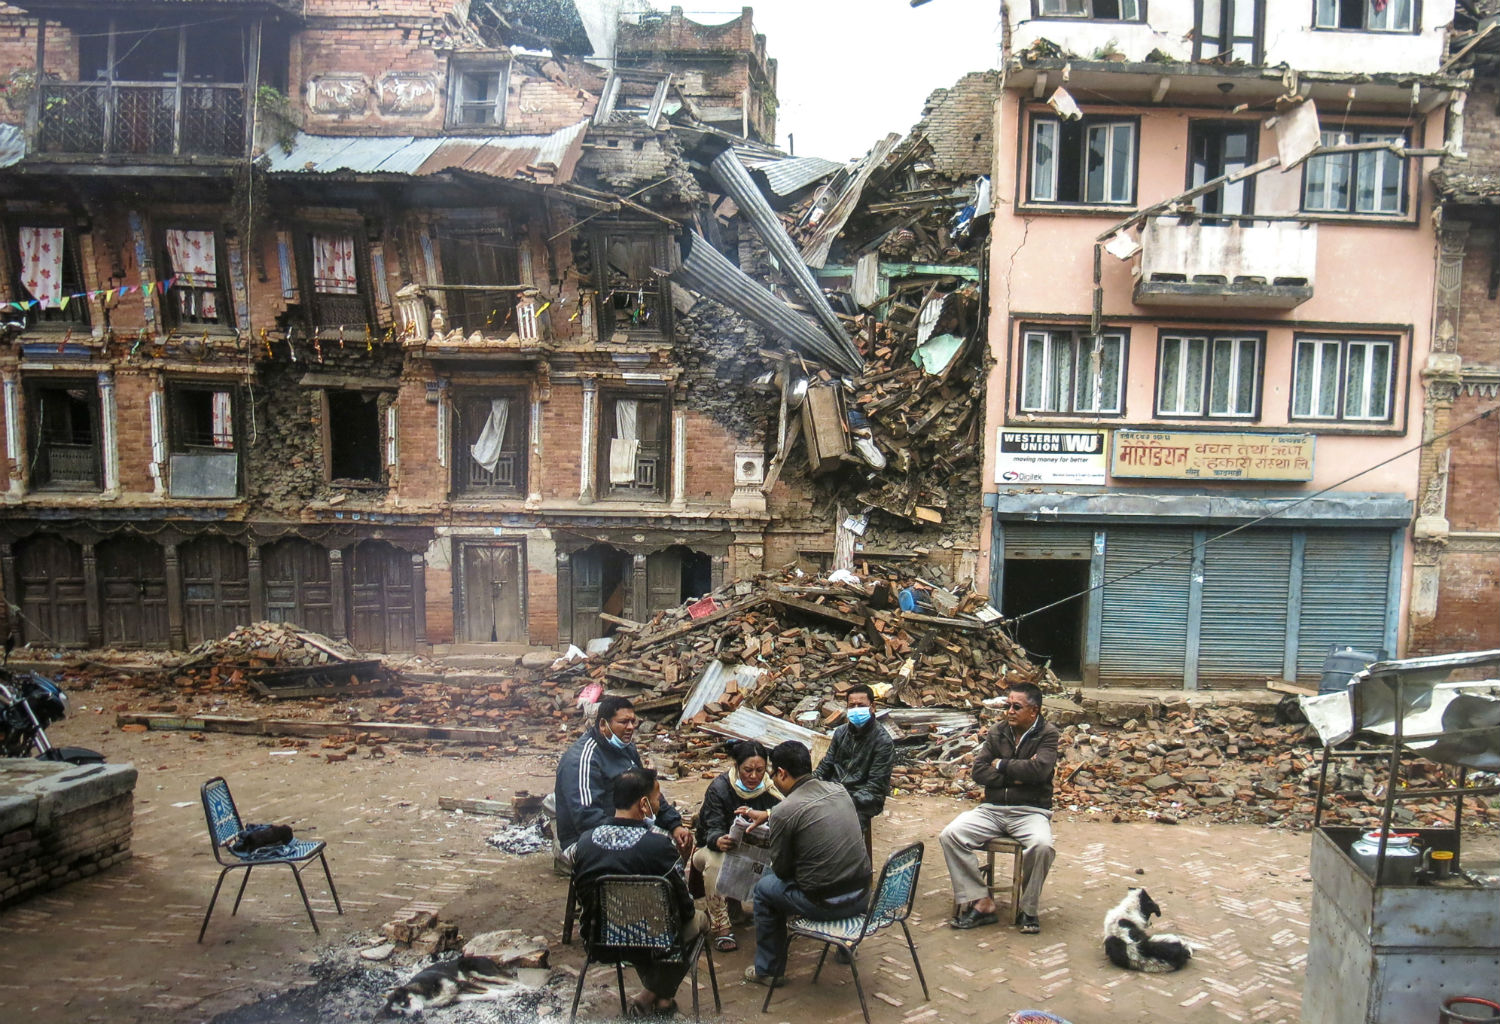 Last April, a massive earthquake struck Nepal, killing 8,000 people, injuring 25,000 and leaving hundreds of thousands homeless. Entire villages were destroyed, and in the winding streets and grand durbar squares of Nepal’s ancient, tightknit cities, the devastation was immense 
